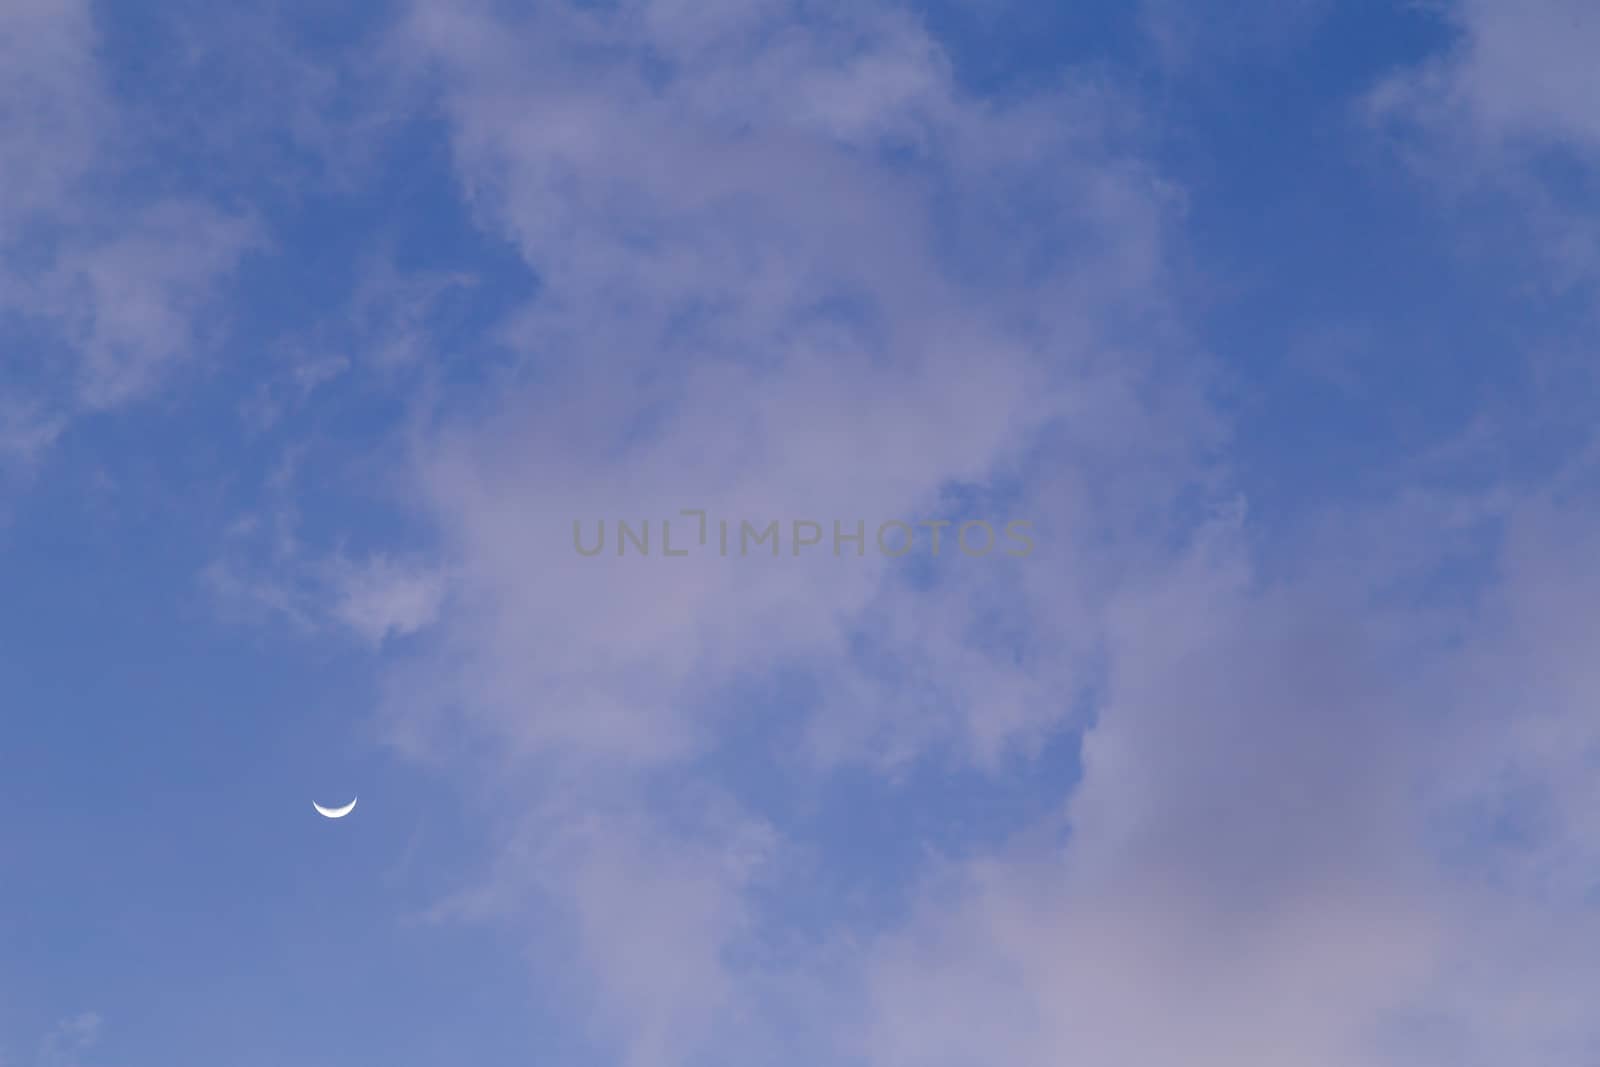 Moon behind the clouds during the day on a bright blue sky. by dugulan